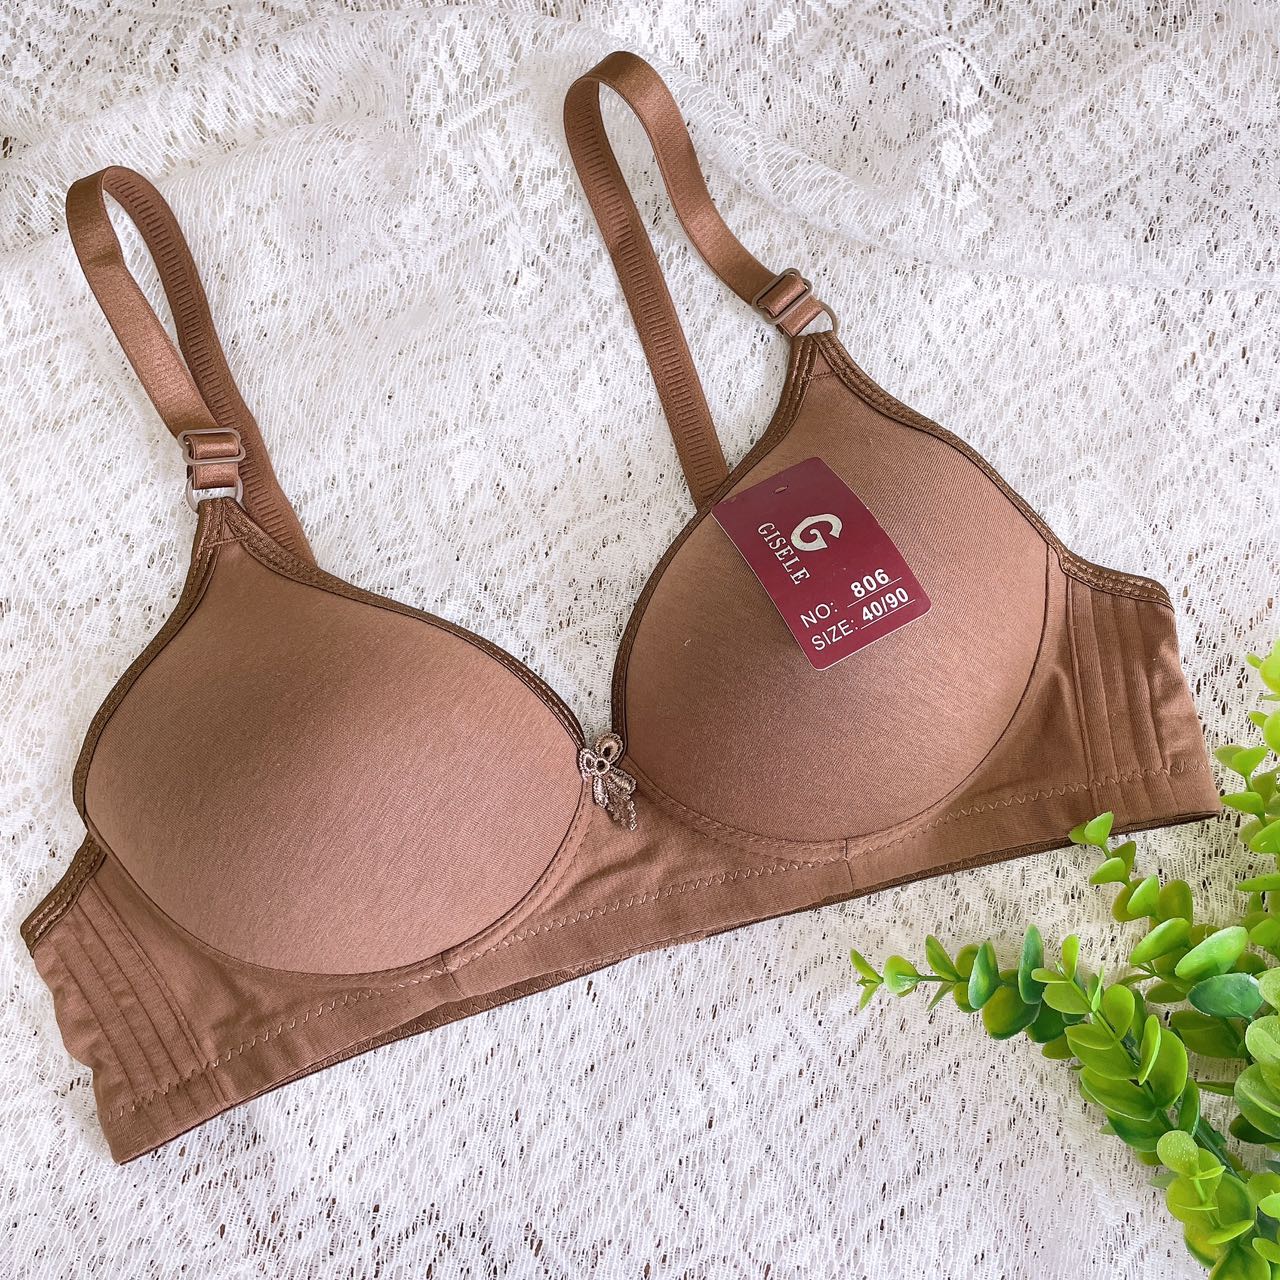 806 wireless bra adjustable strap plain,cotton w/ 2hooks full cup good for  ladies CupB size40-44